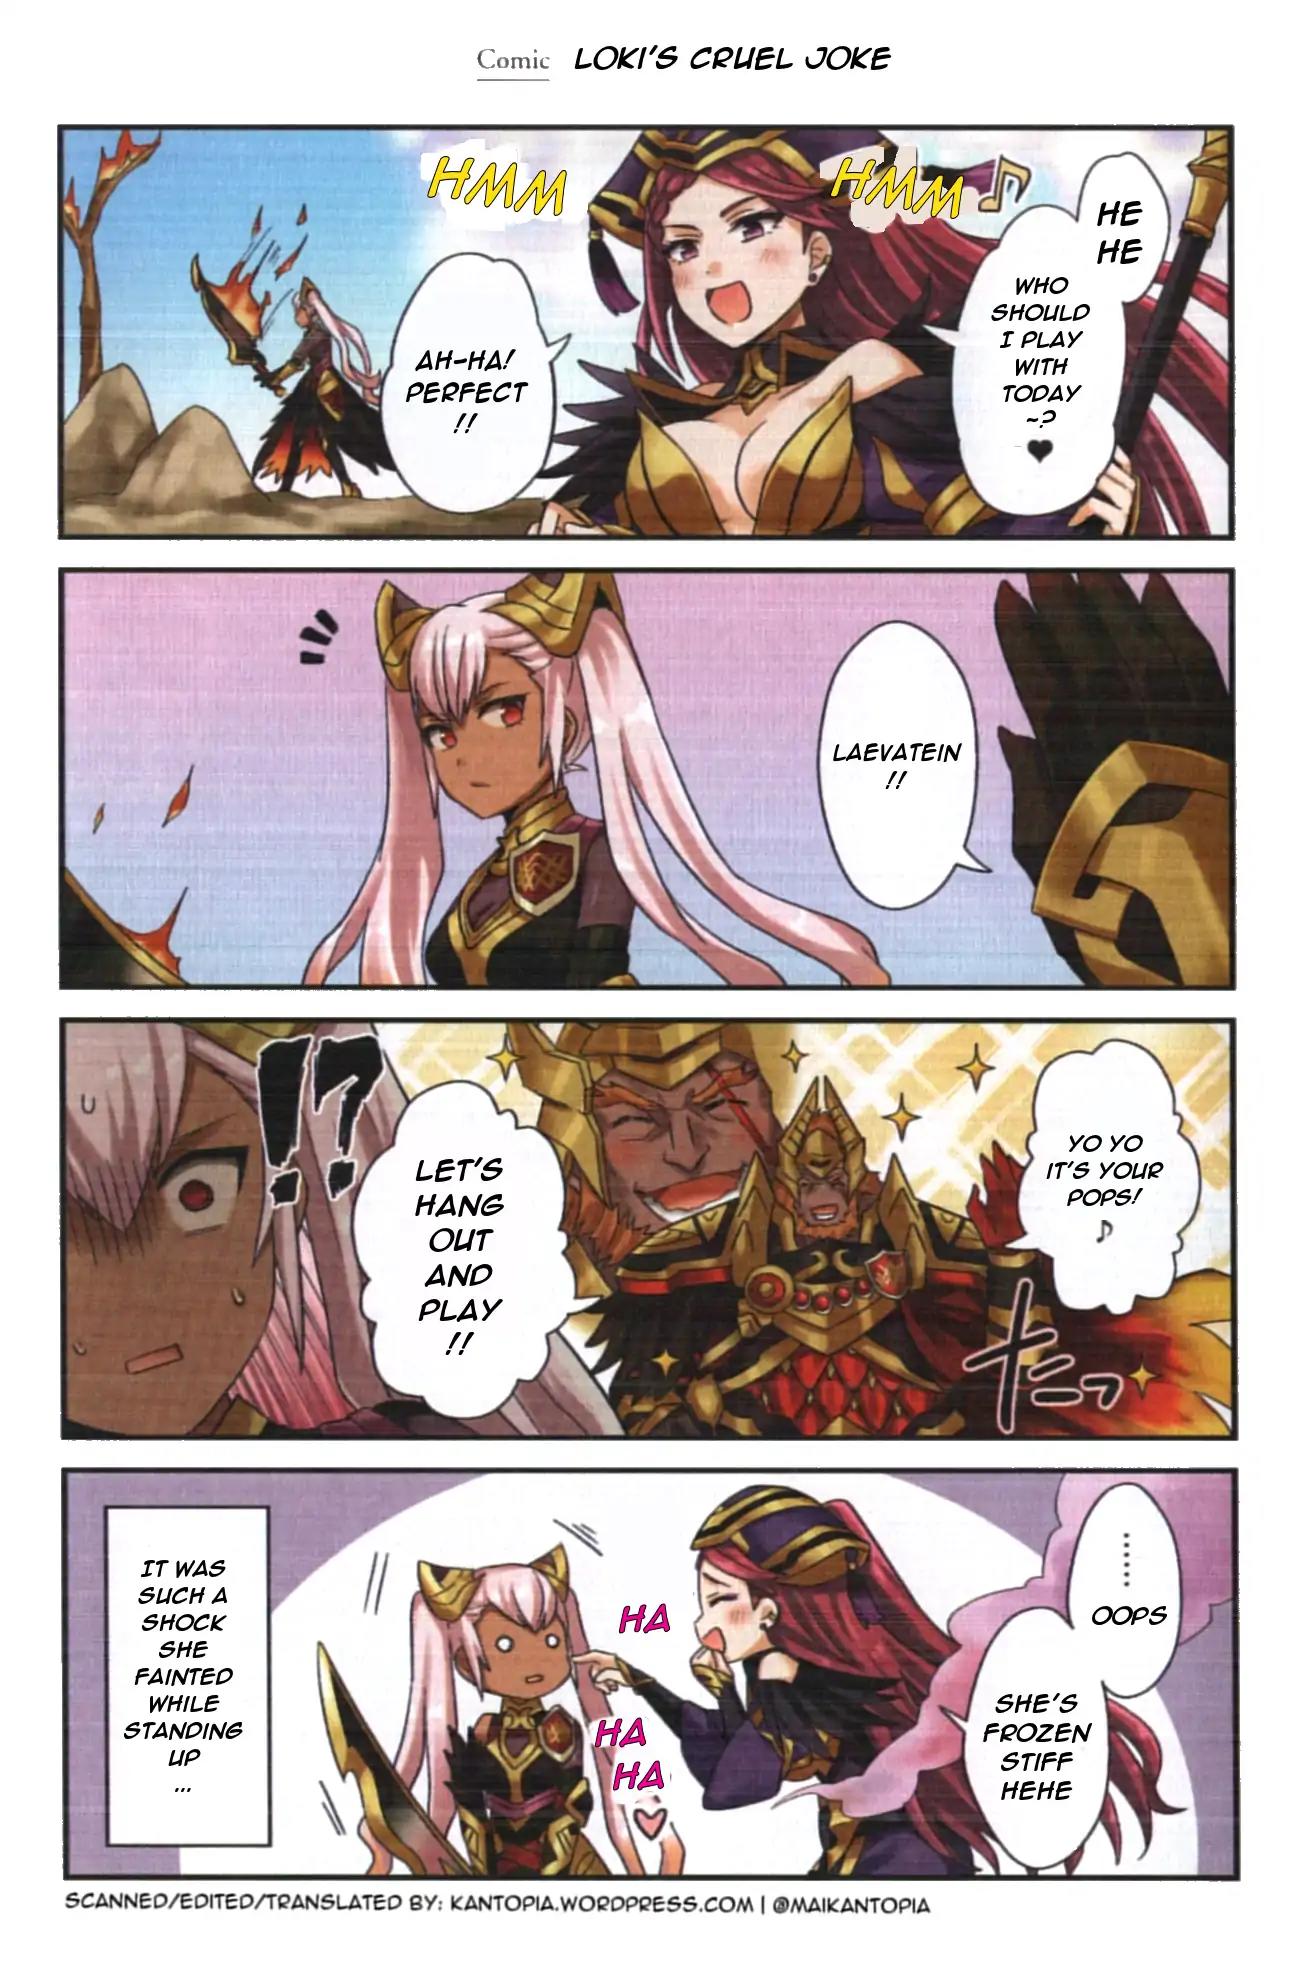 Fire Emblem Heroes Daily Lives of the Heroes Vol.1 Chapter 0.15: Character comic: